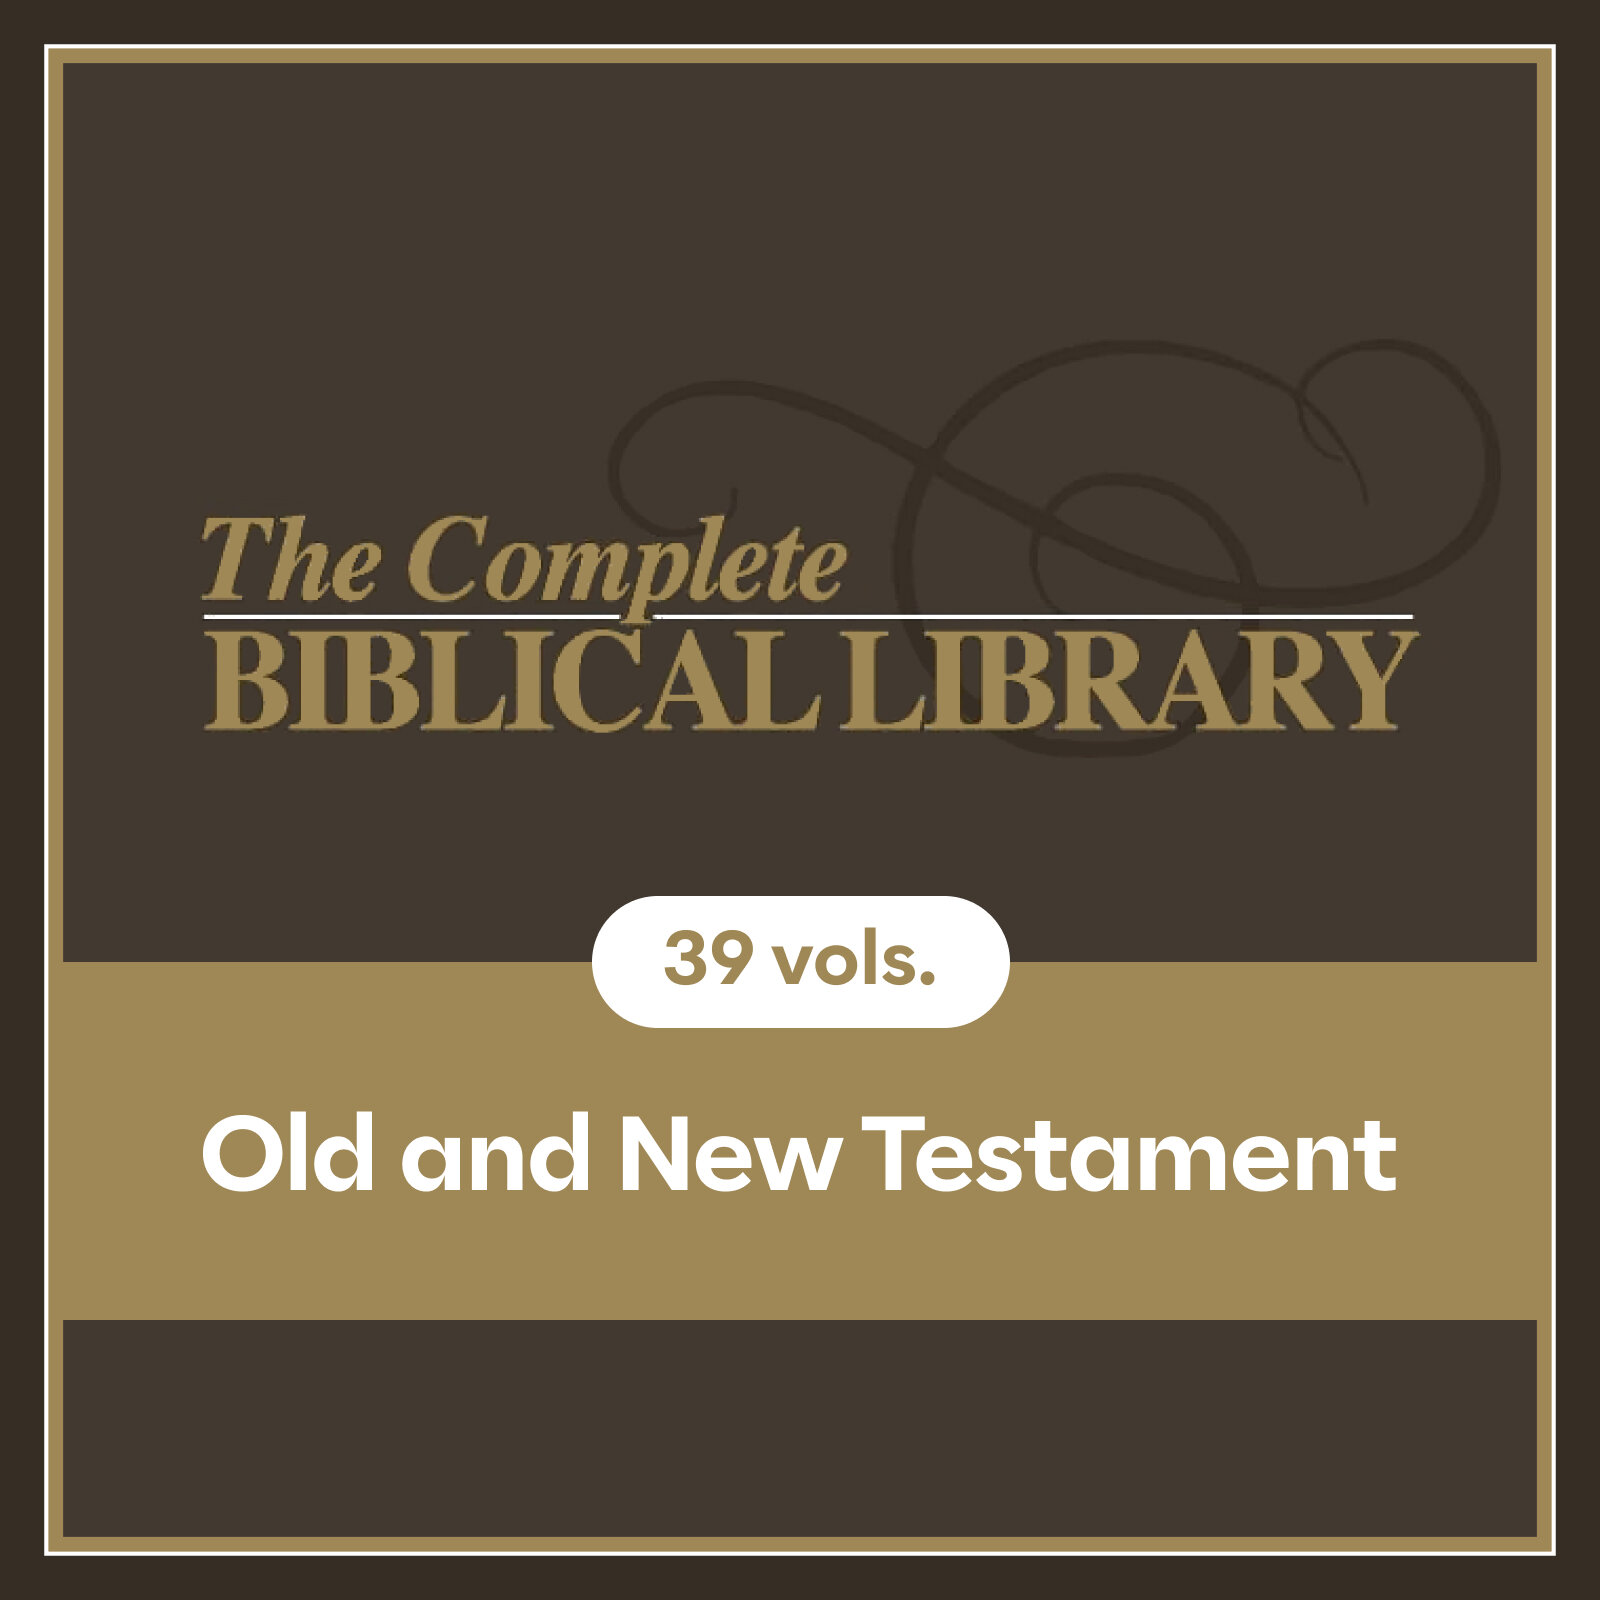 Old and New Testament, 39 vols. (The Complete Biblical Library | CBL)